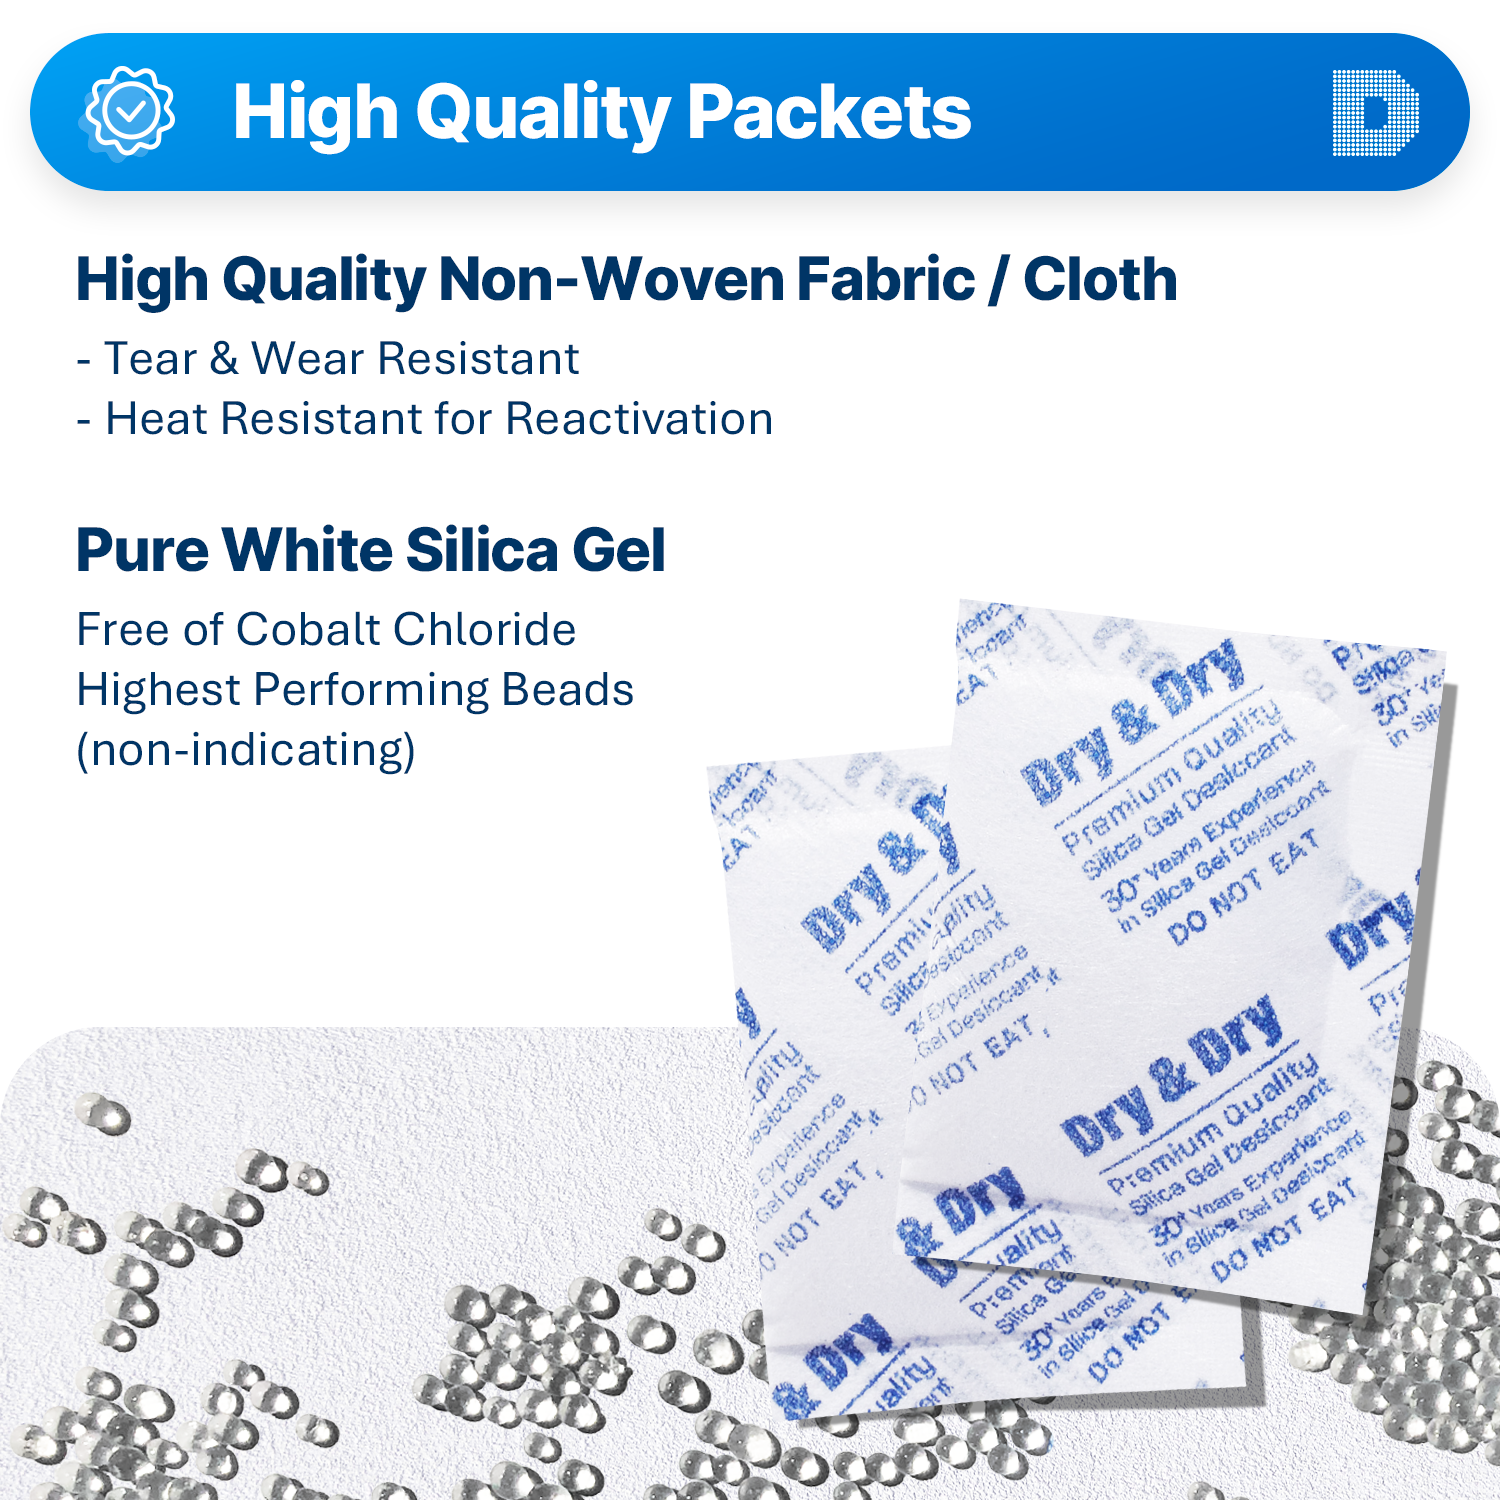 10 Gram [1500 Packets]  "Dry & Dry" Premium Silica Gel Desiccant Packets - Rechargeable Non-Woven Fabric (Cloth)